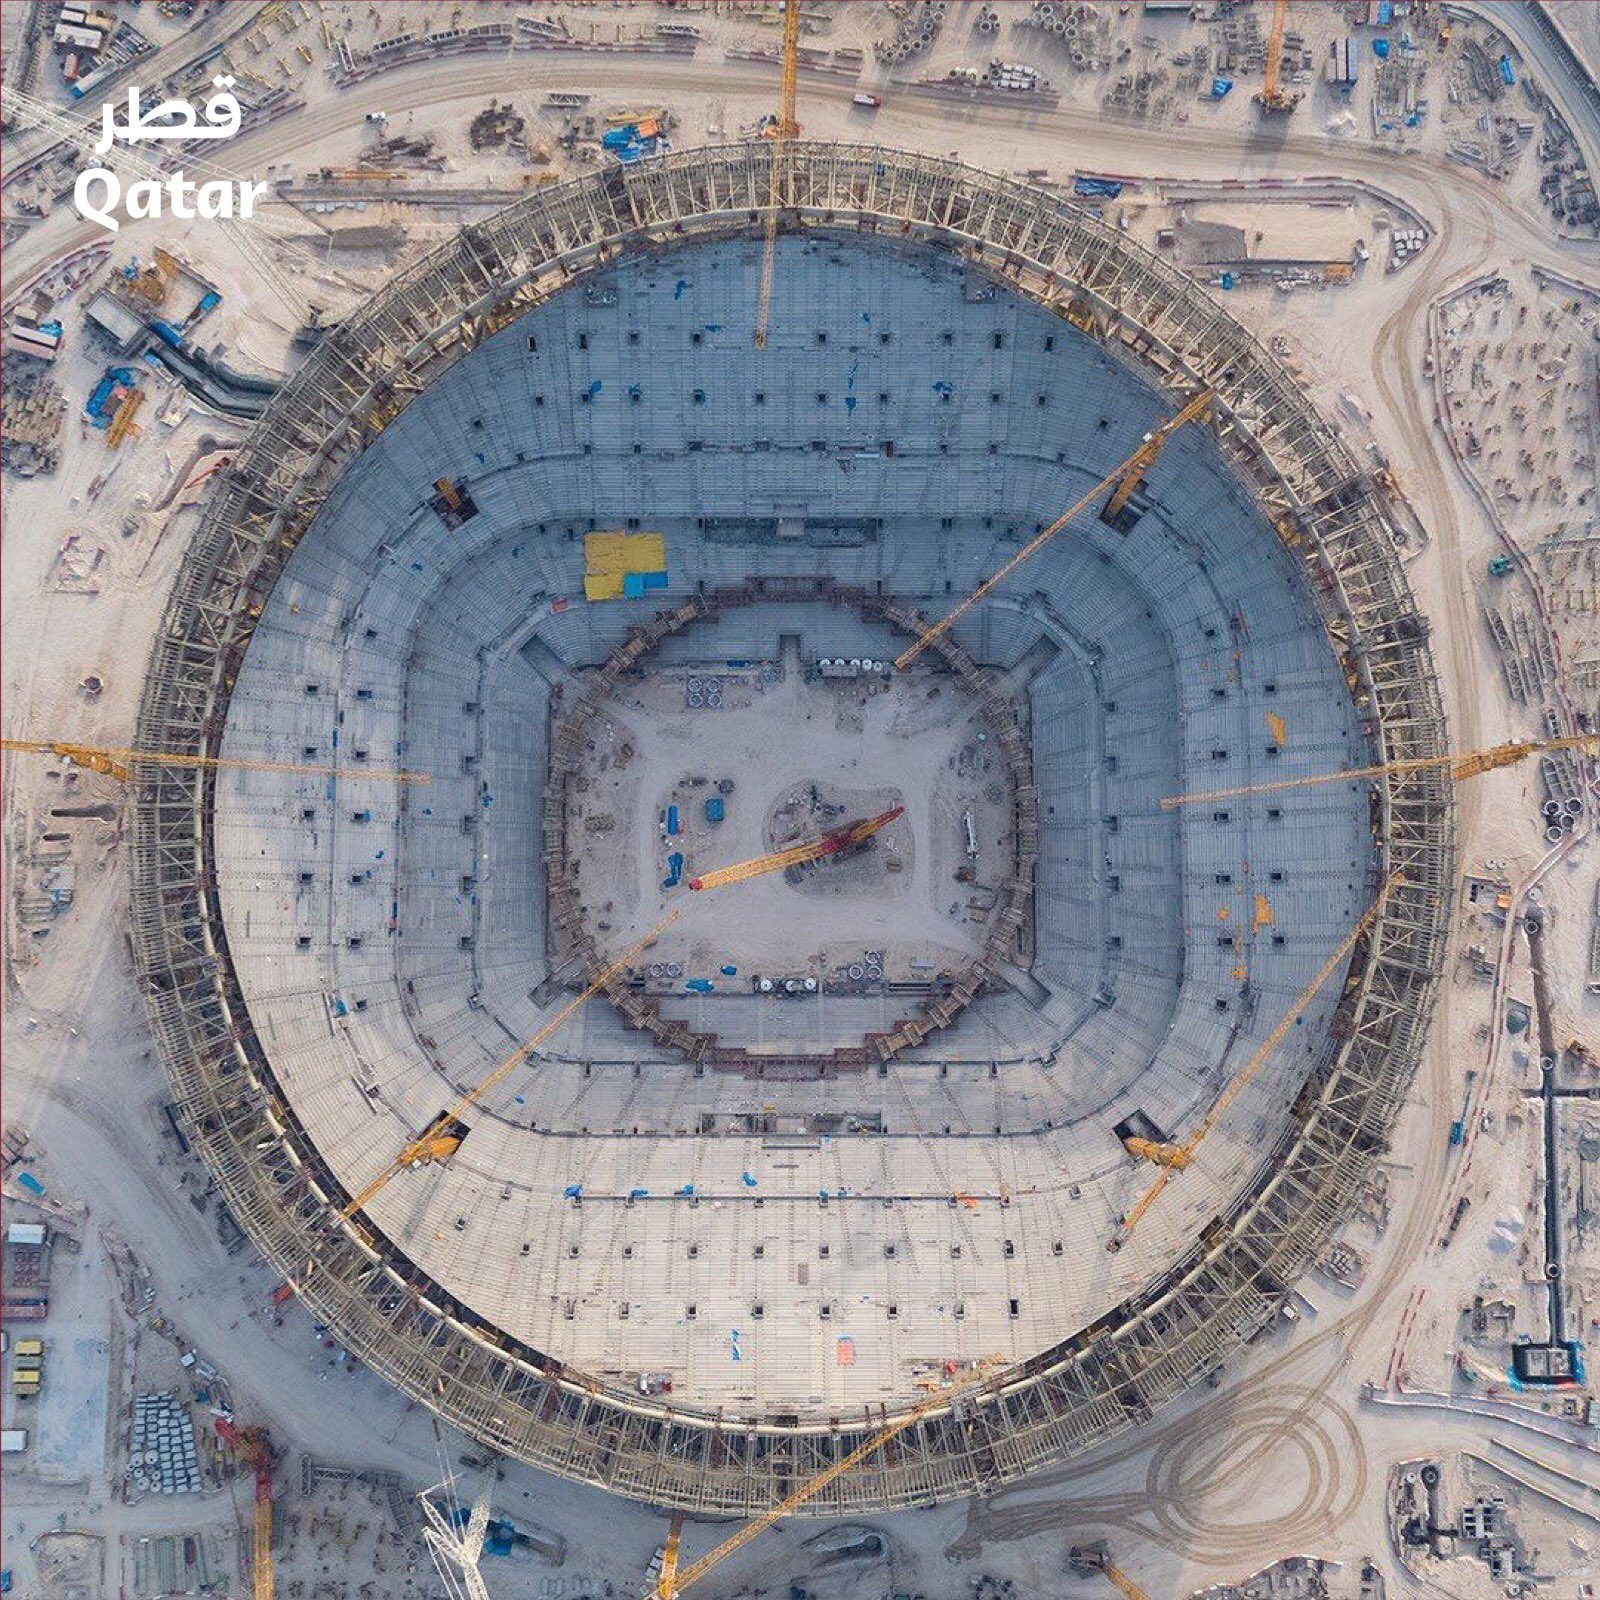 The latest developments in Lusail World Cup Stadium